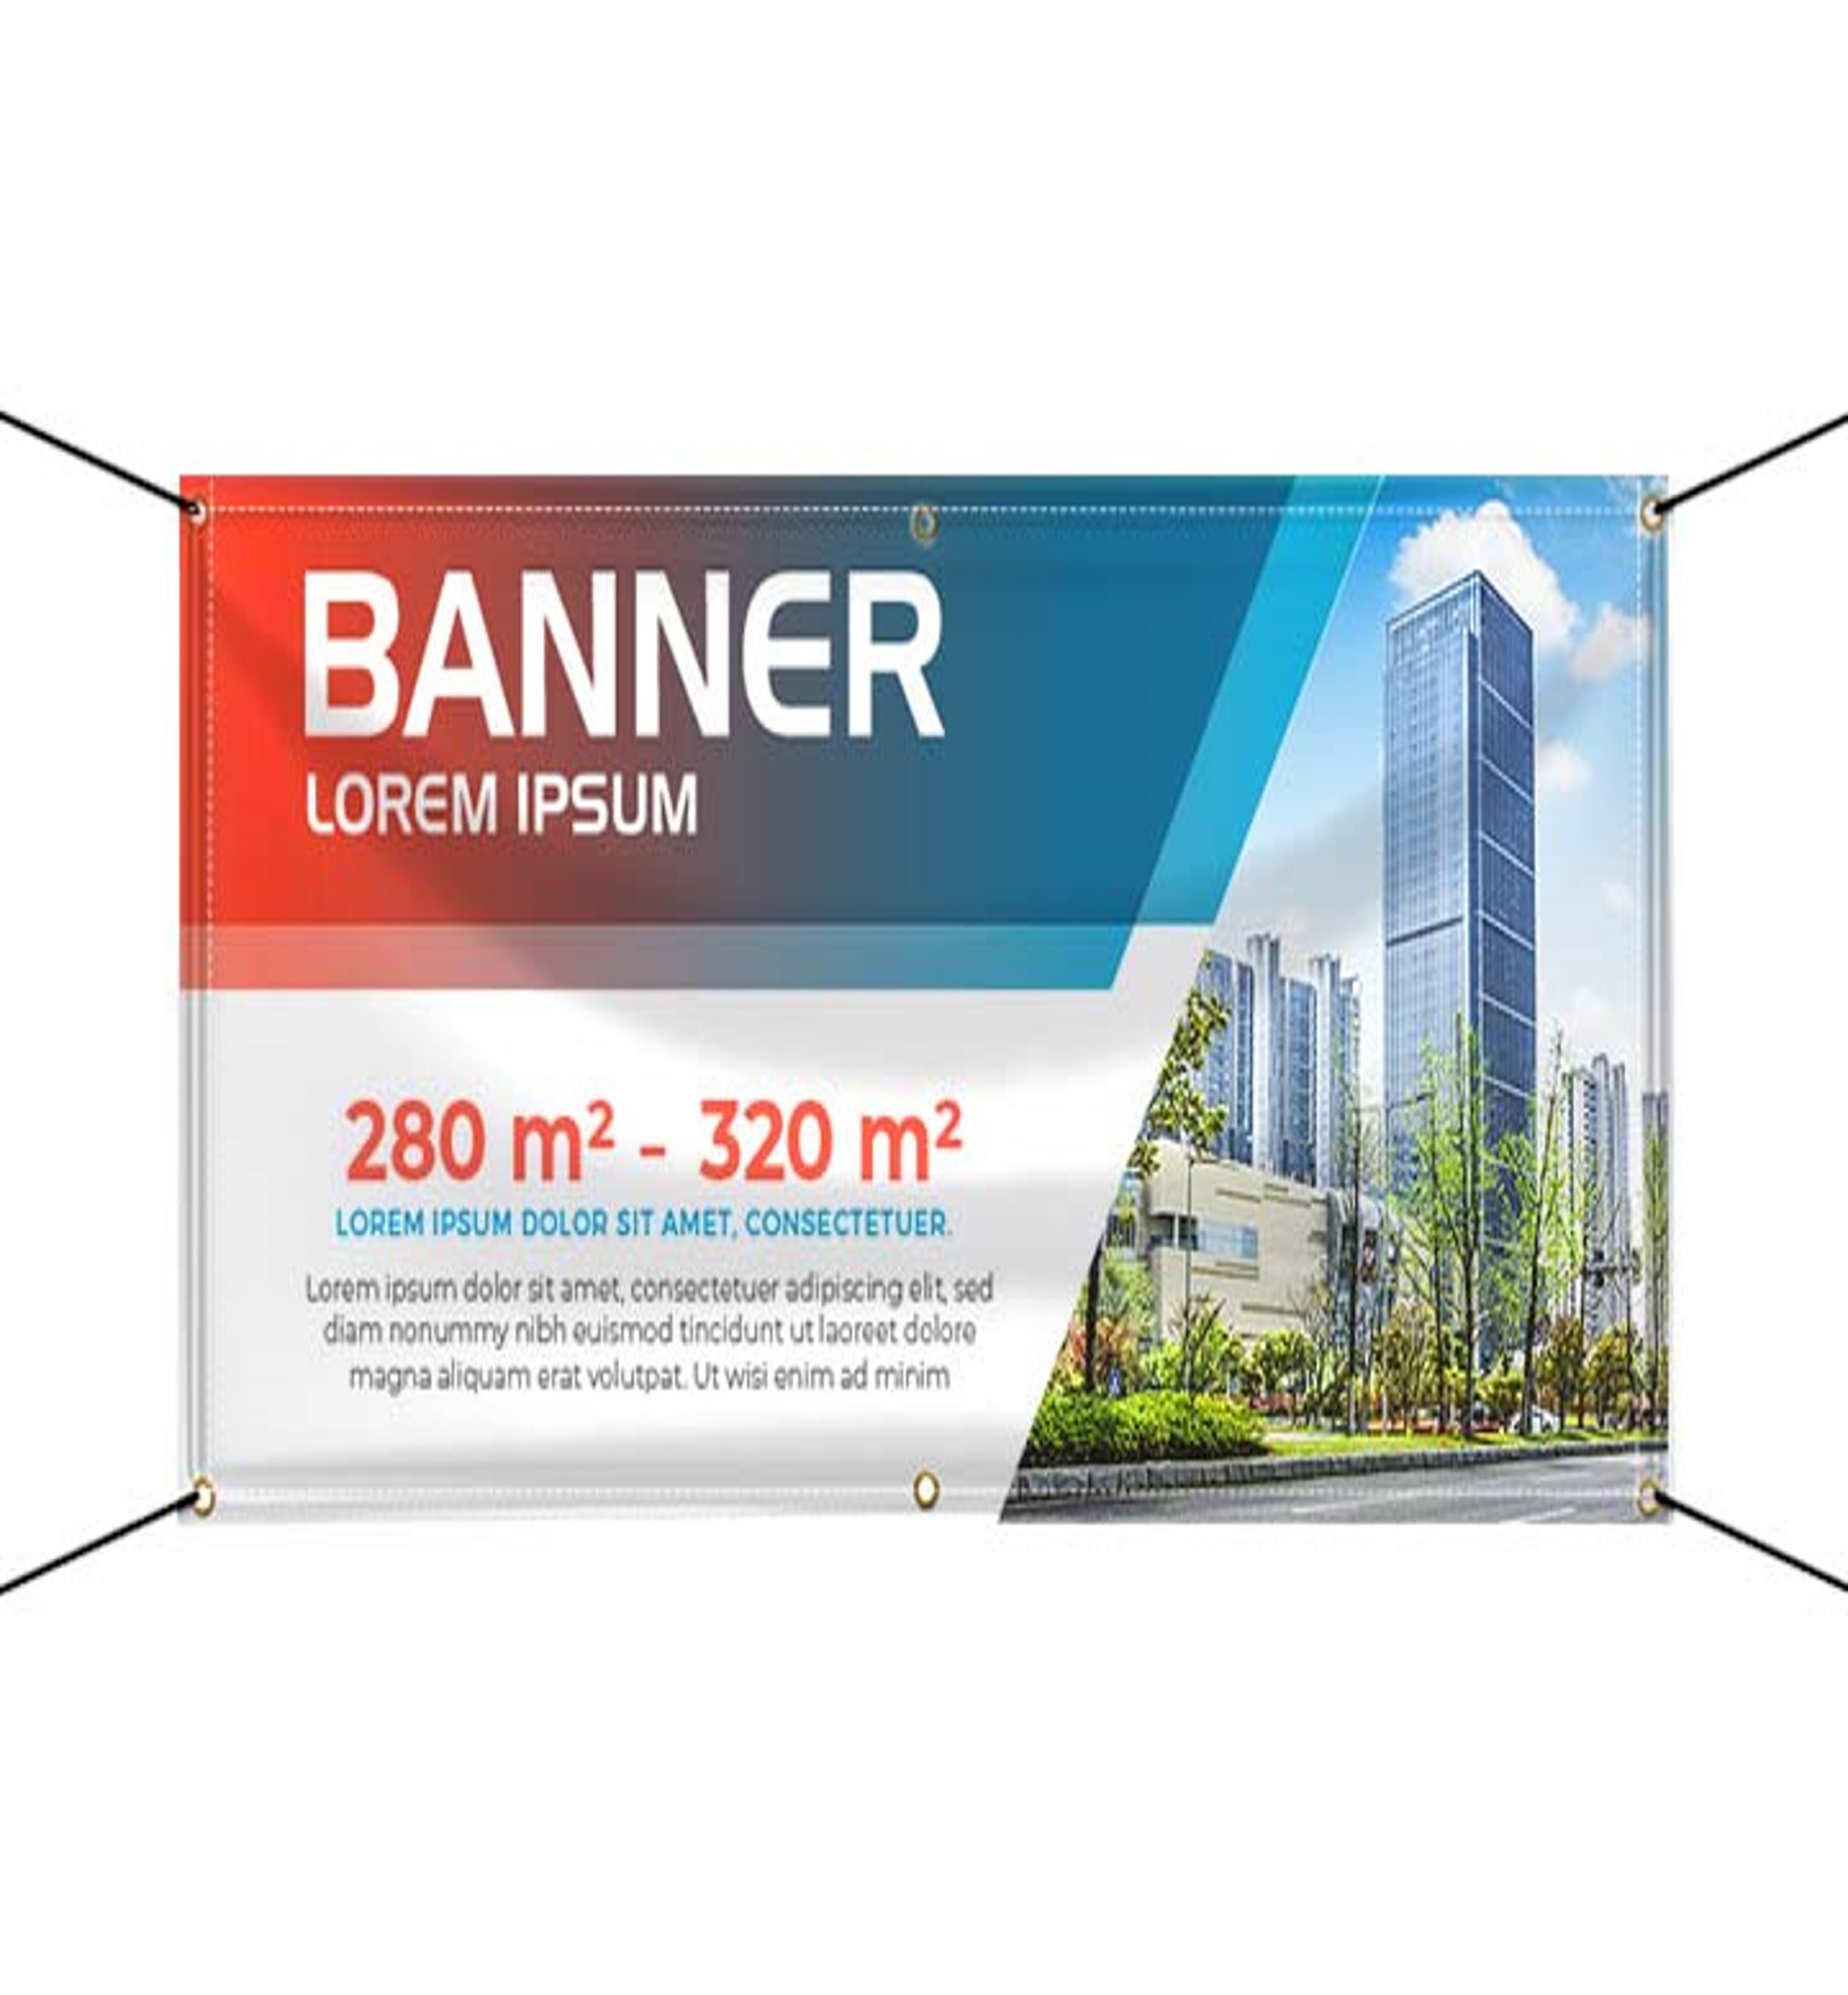 Customized Banners